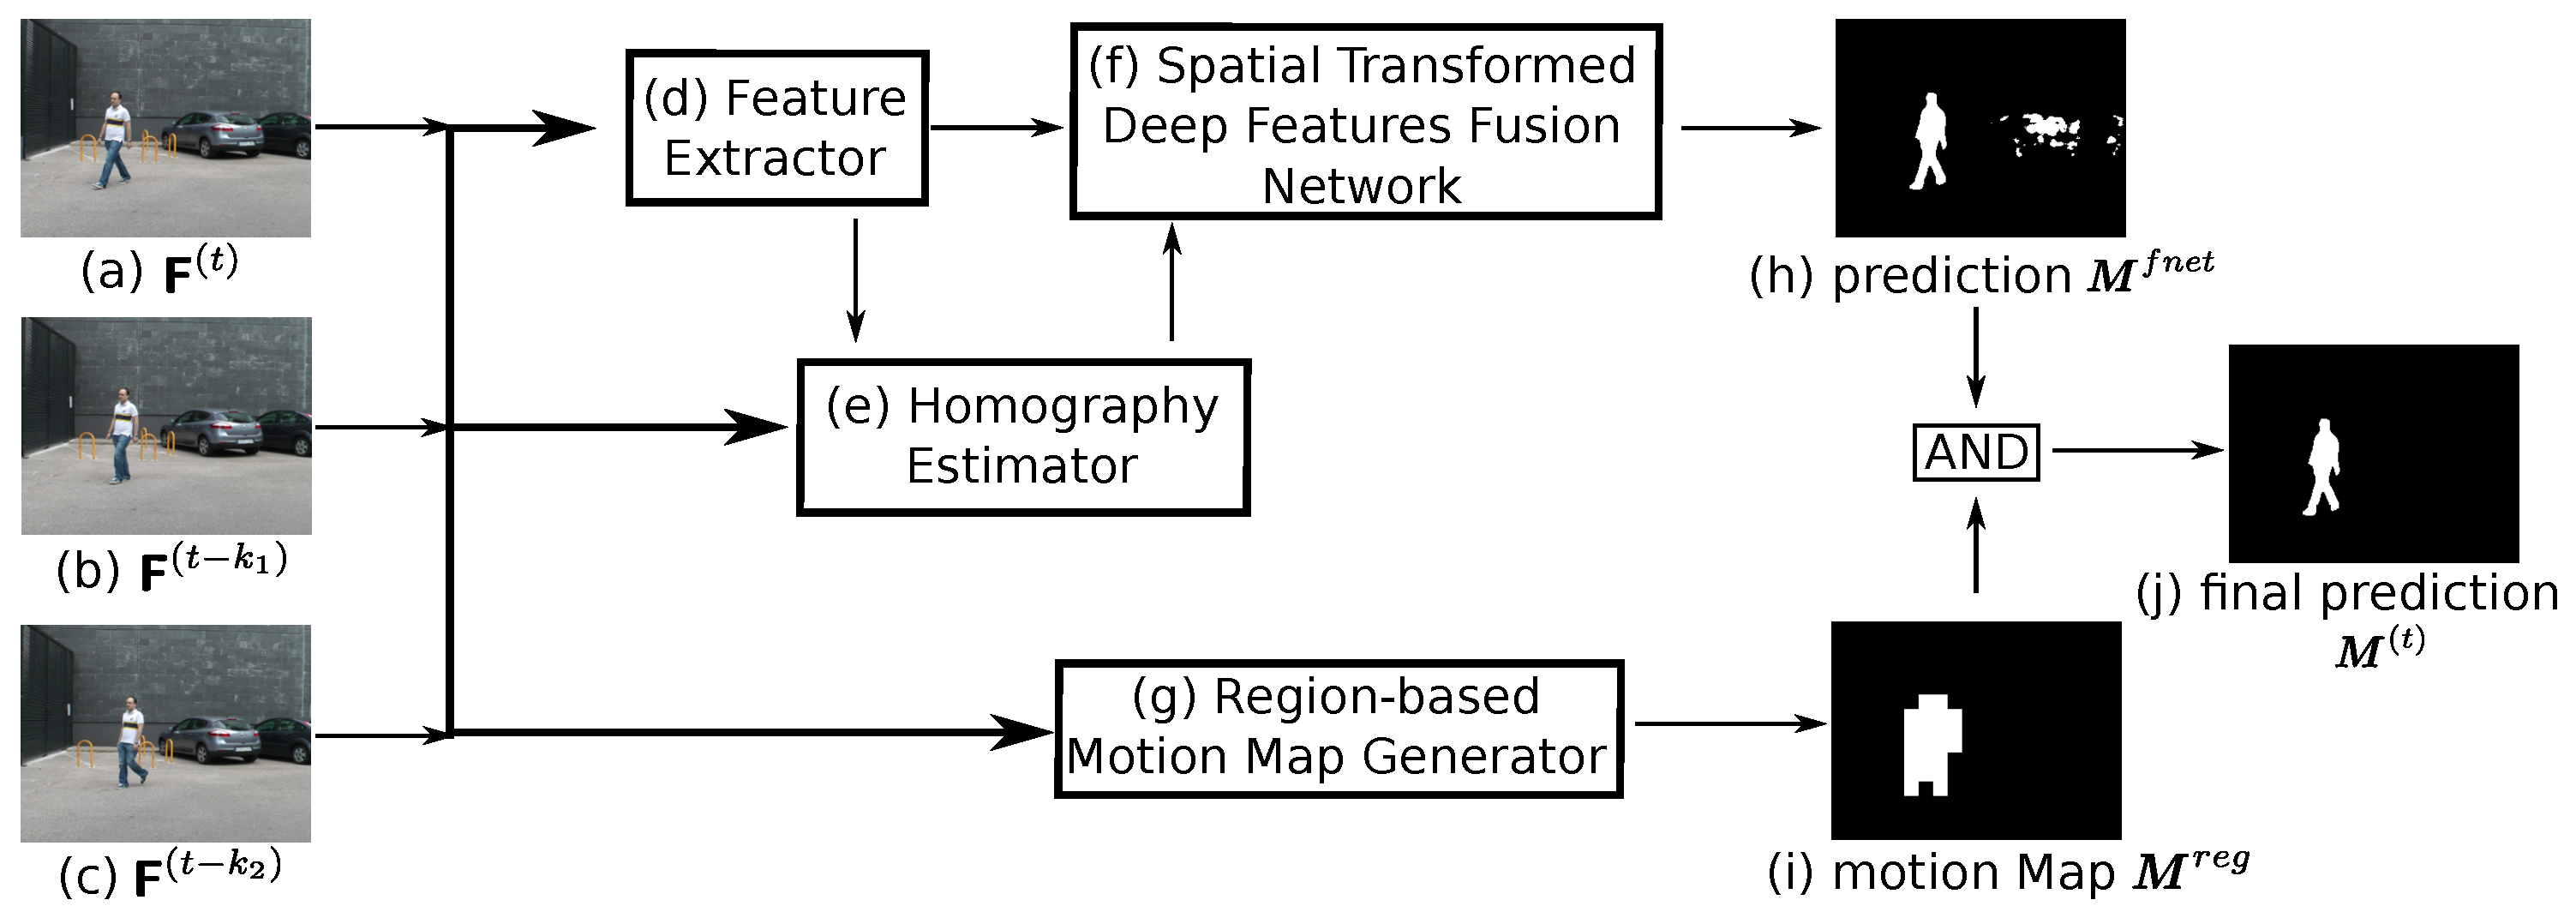 Sensors | Free Full-Text | Deep Features Homography Transformation Fusion  Network—A Universal Foreground Segmentation Algorithm for PTZ Cameras and a  Comparative Study